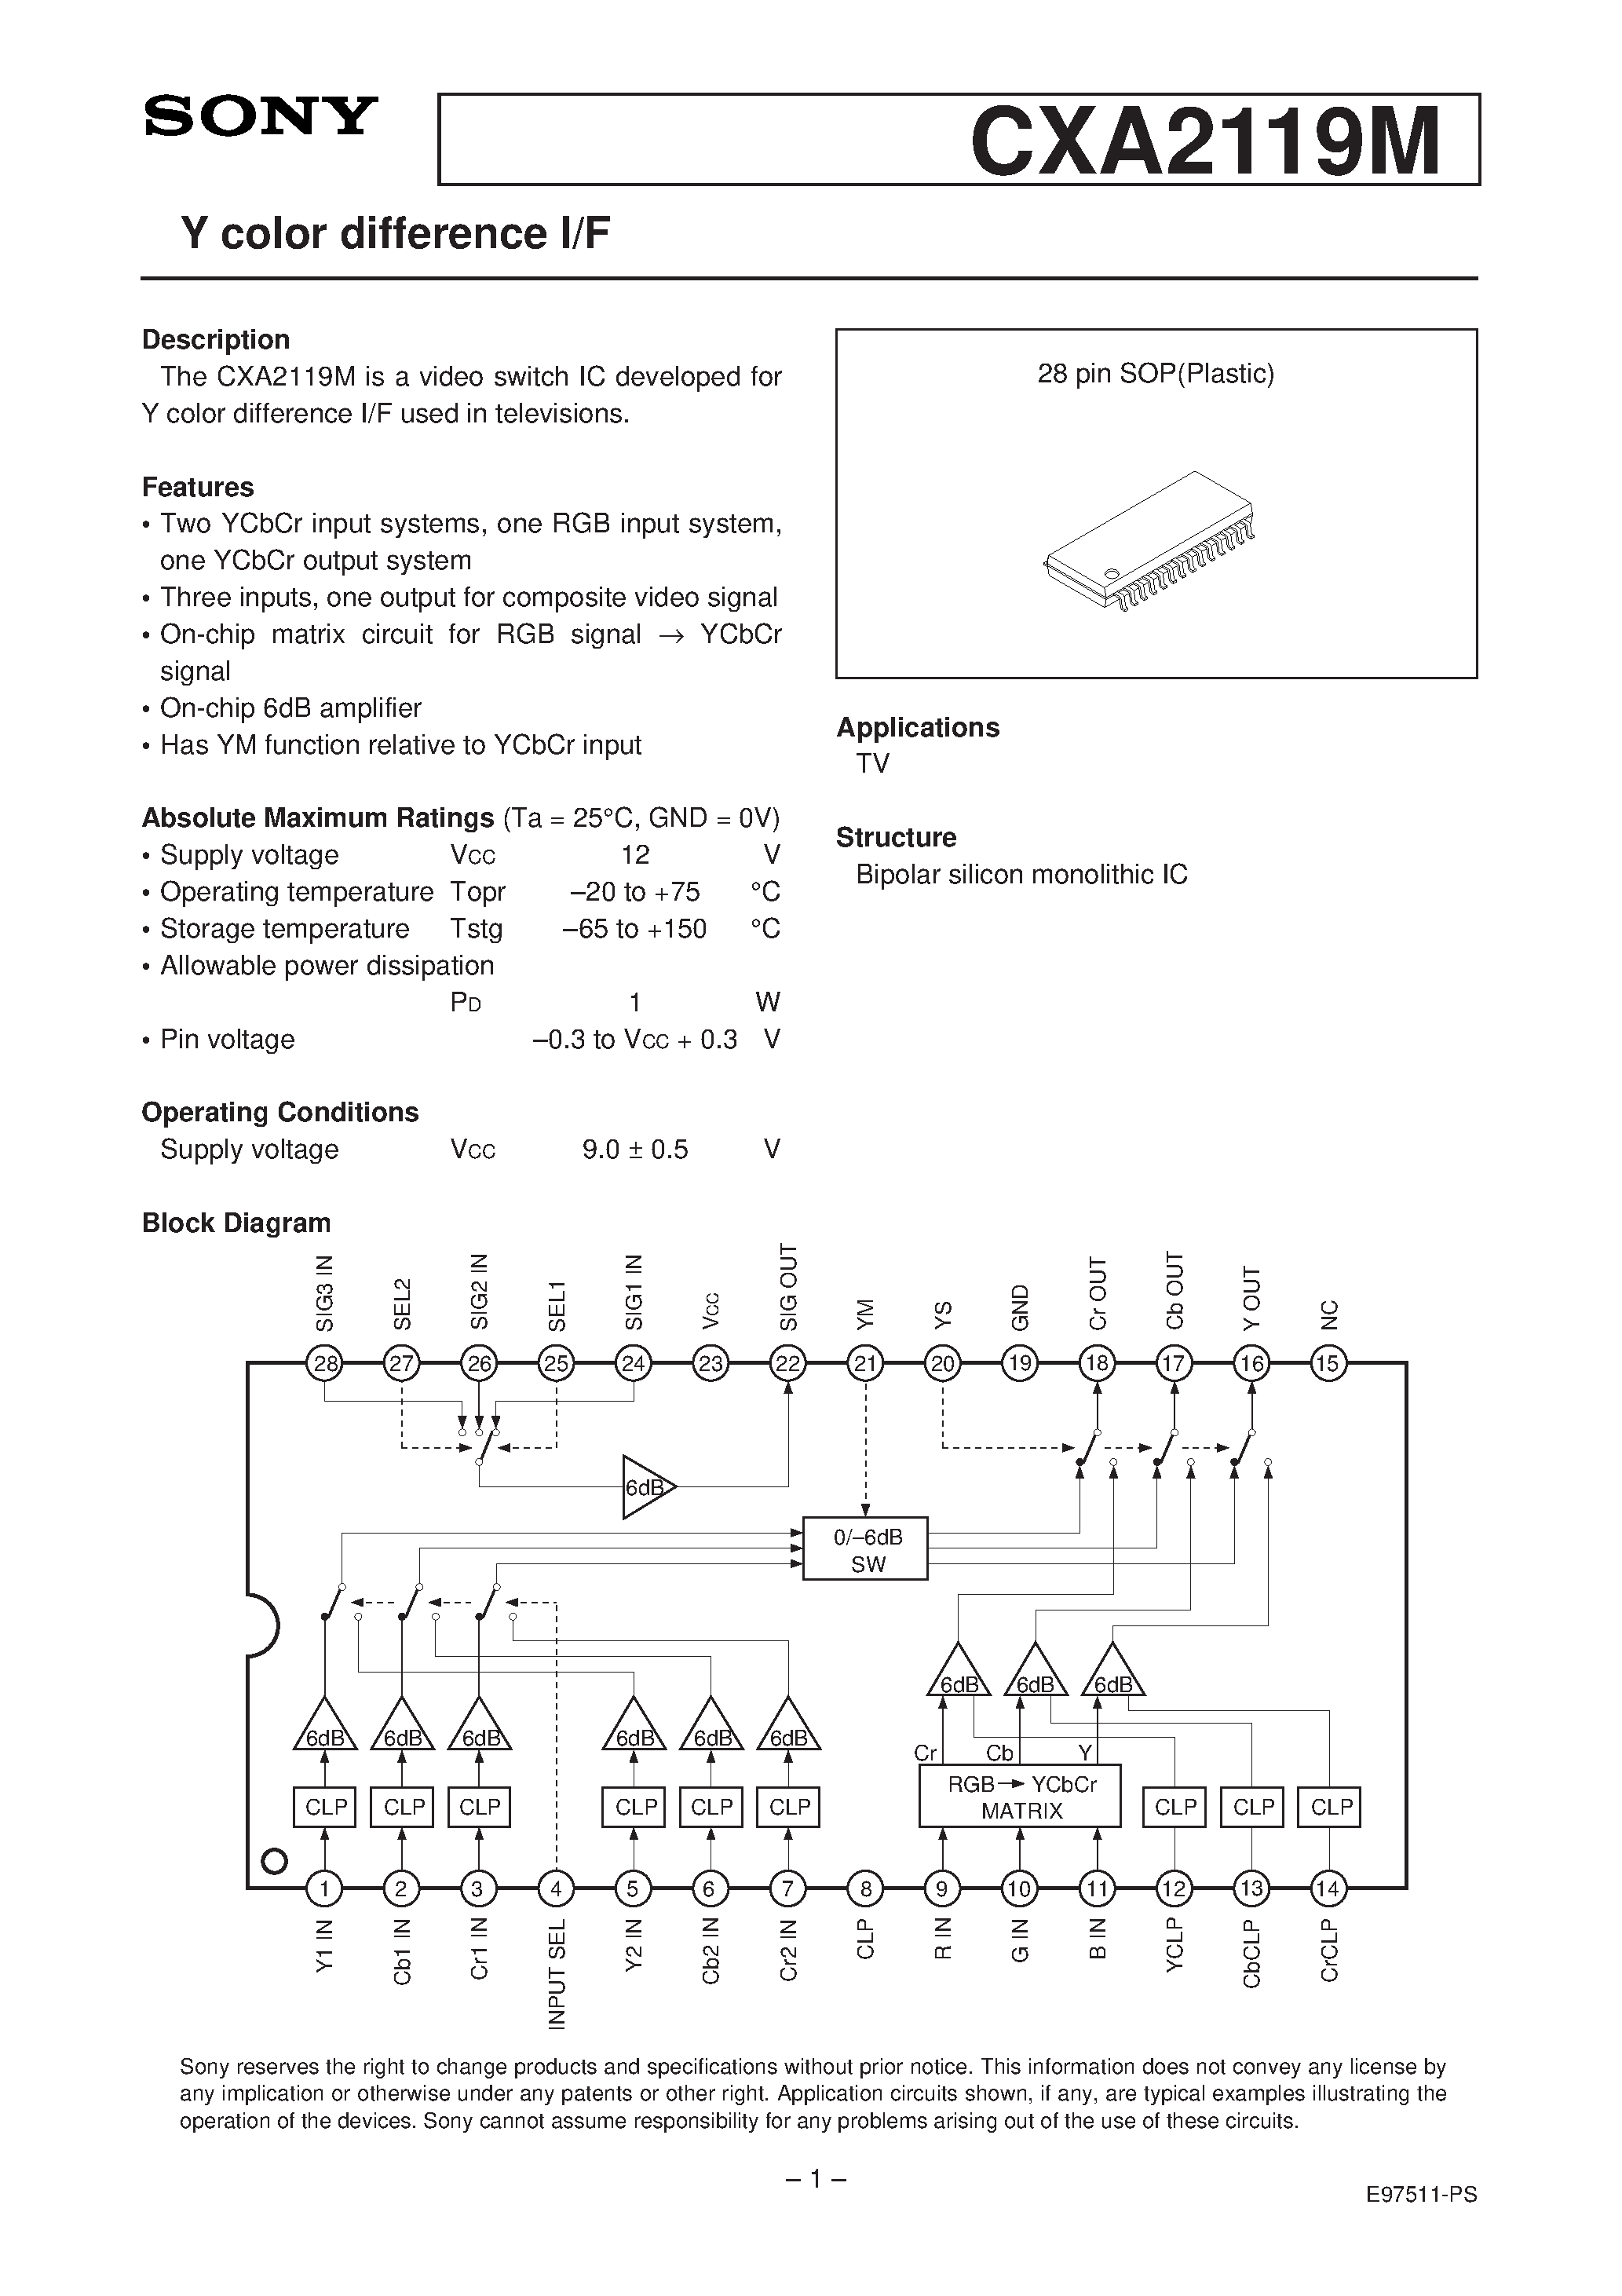 Datasheet CXA2119M - Y color difference I/F page 1